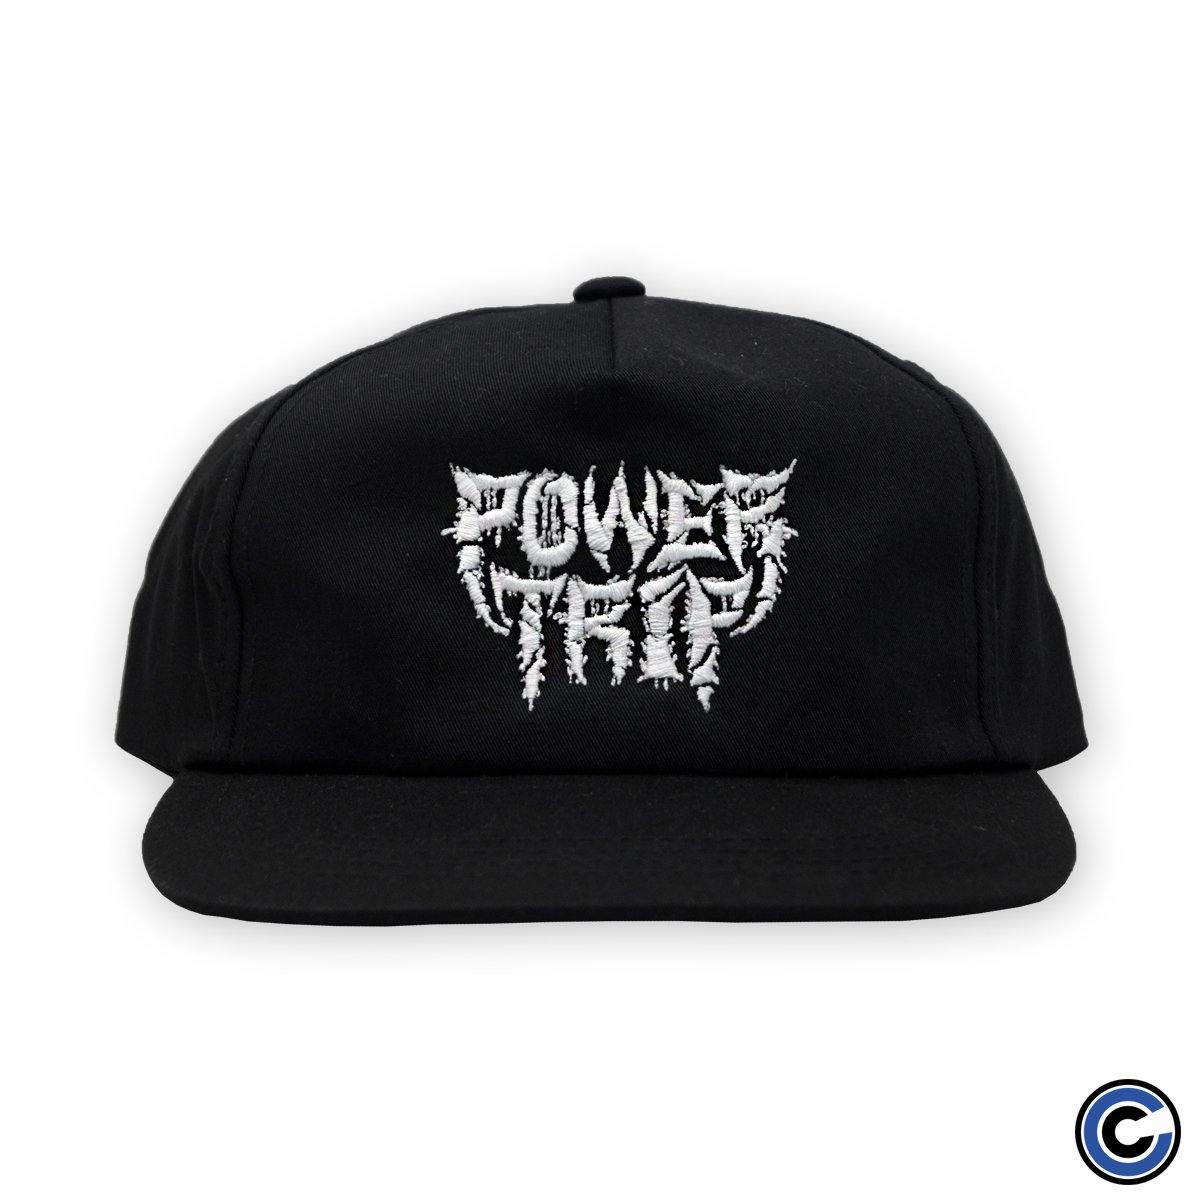 Buy – Power Trip "Distorted Logo" Hat – Band & Music Merch – Cold Cuts Merch